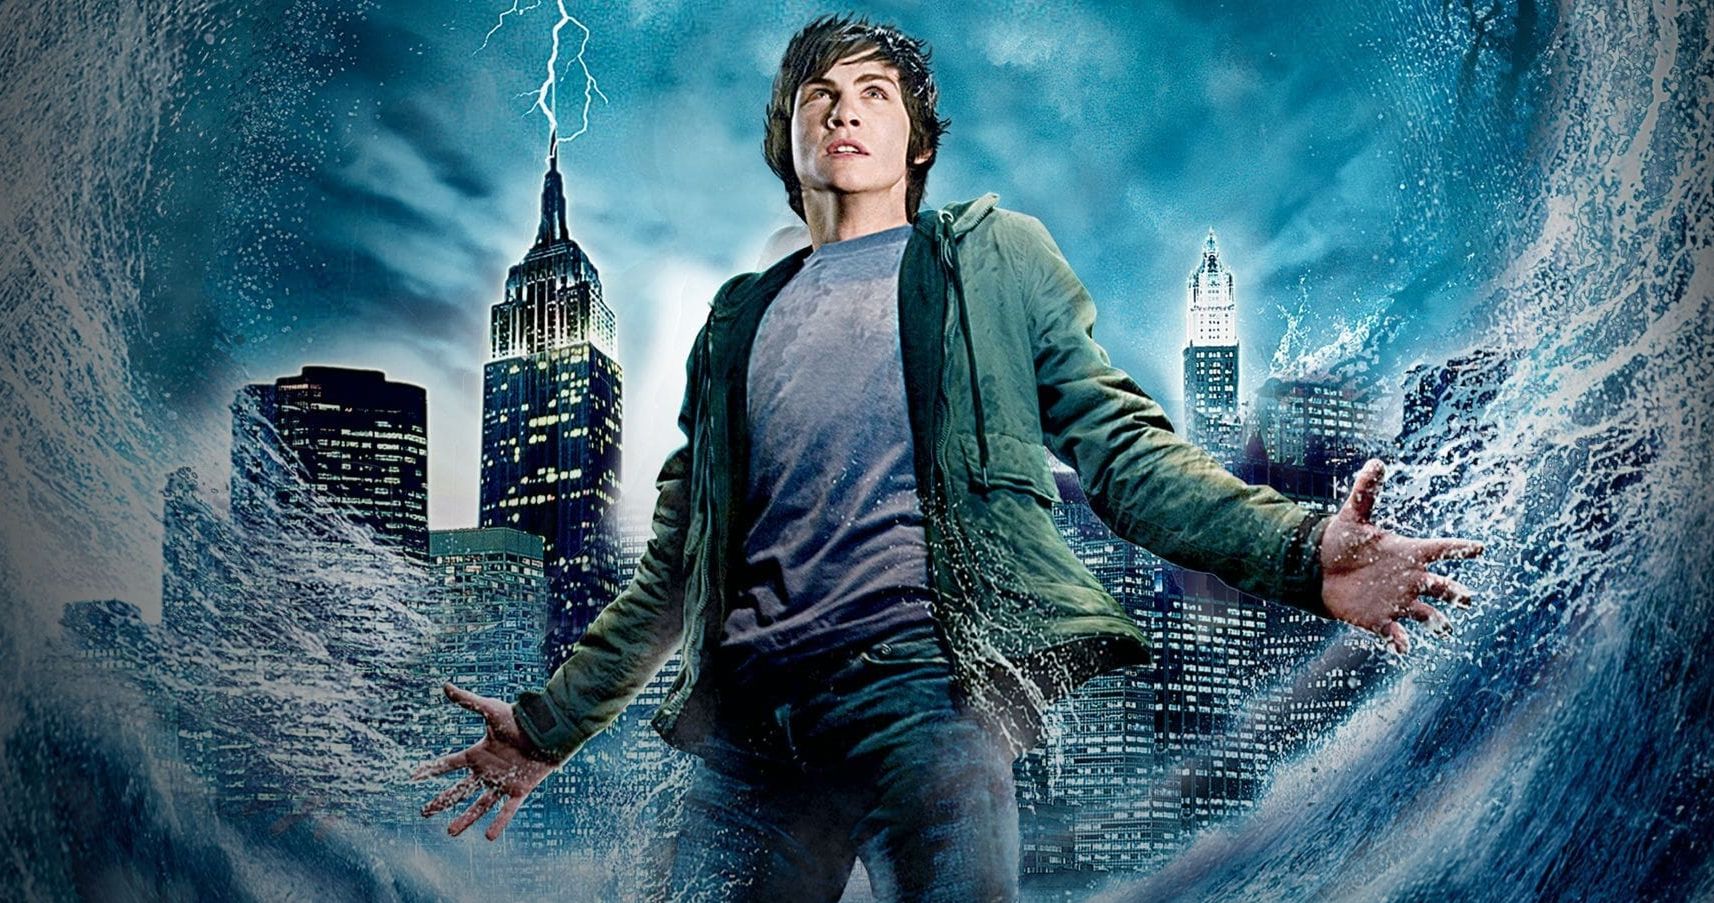 Percy Jackson TV Series Moves Closer as Creator Reveals 'Positive' Meeting